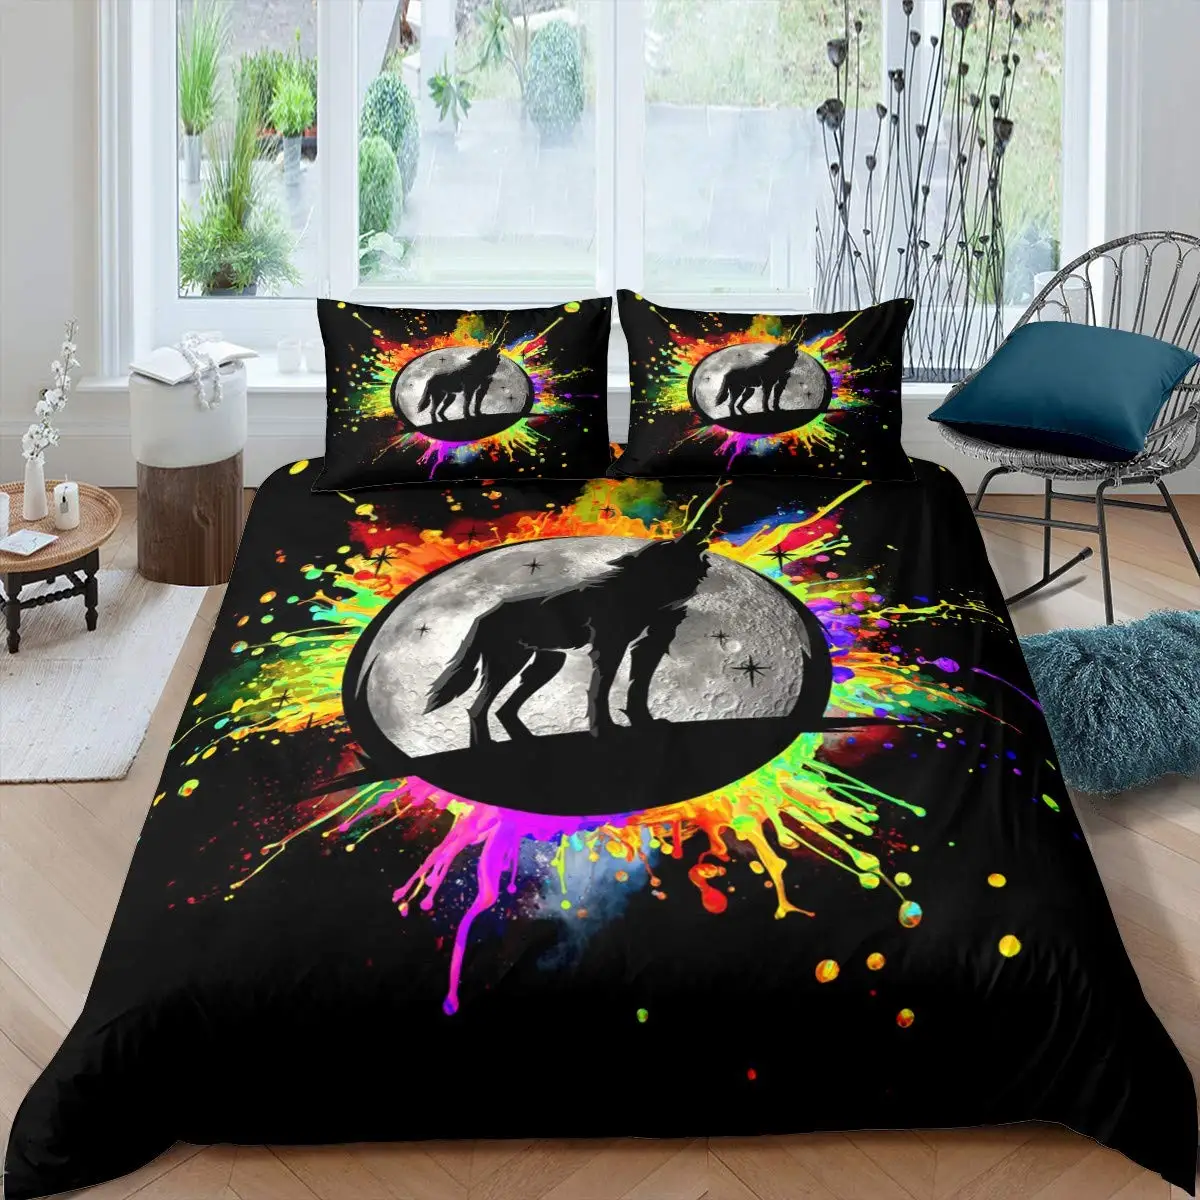 

Wolf Duvet Cover Set King Queen Size Boho Wolf Twin Bedding Comforter Cover 2/3pcs Polyester Quilt Cover Set Wildlife Animal